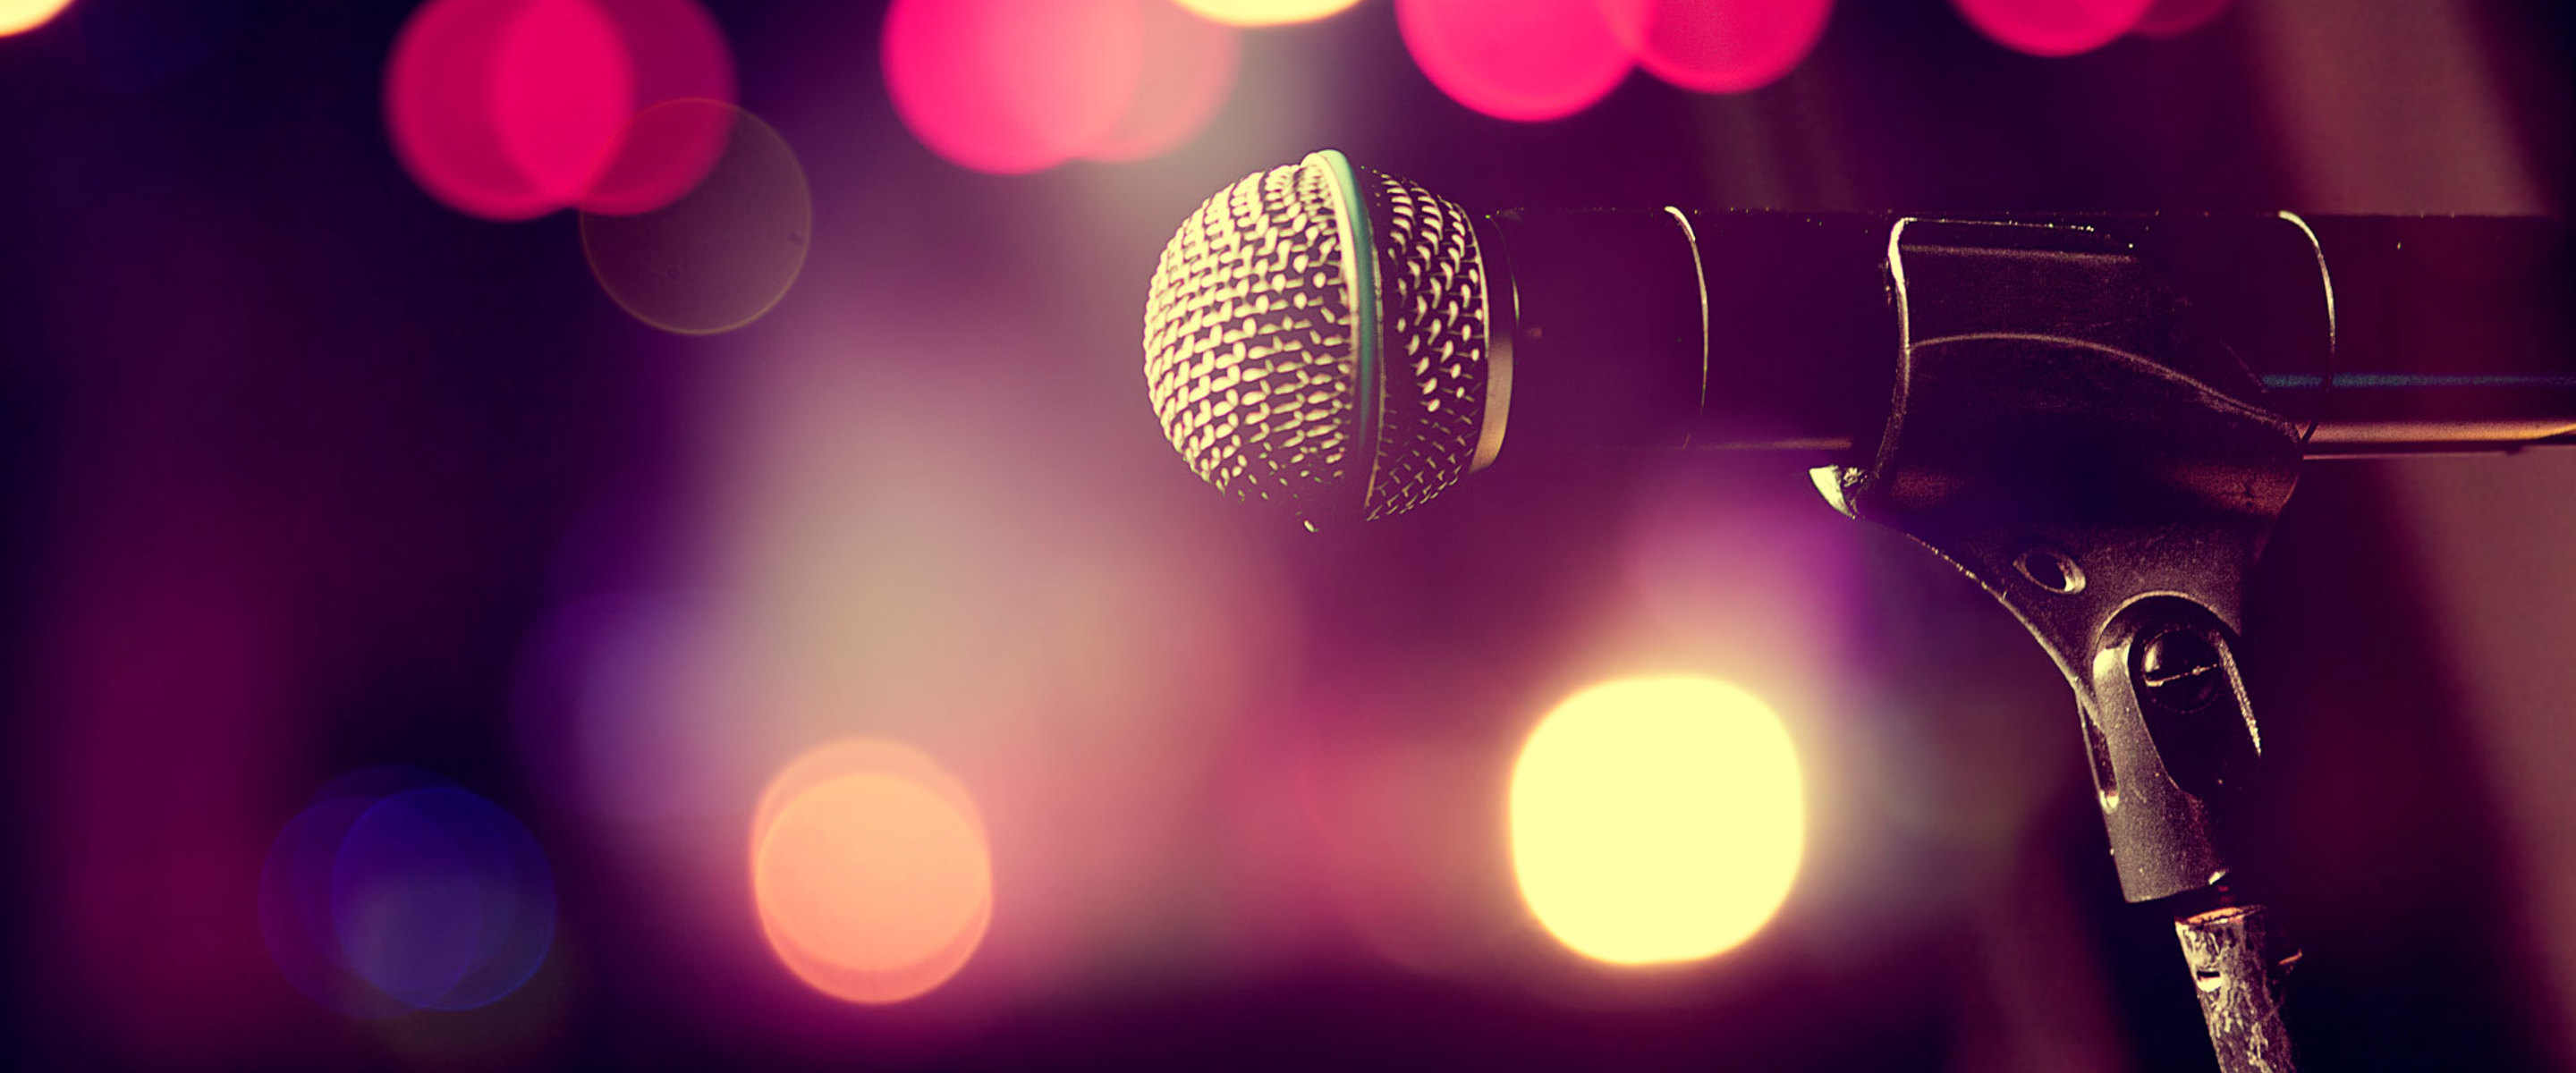 A microphone on stage with stage lights in the background